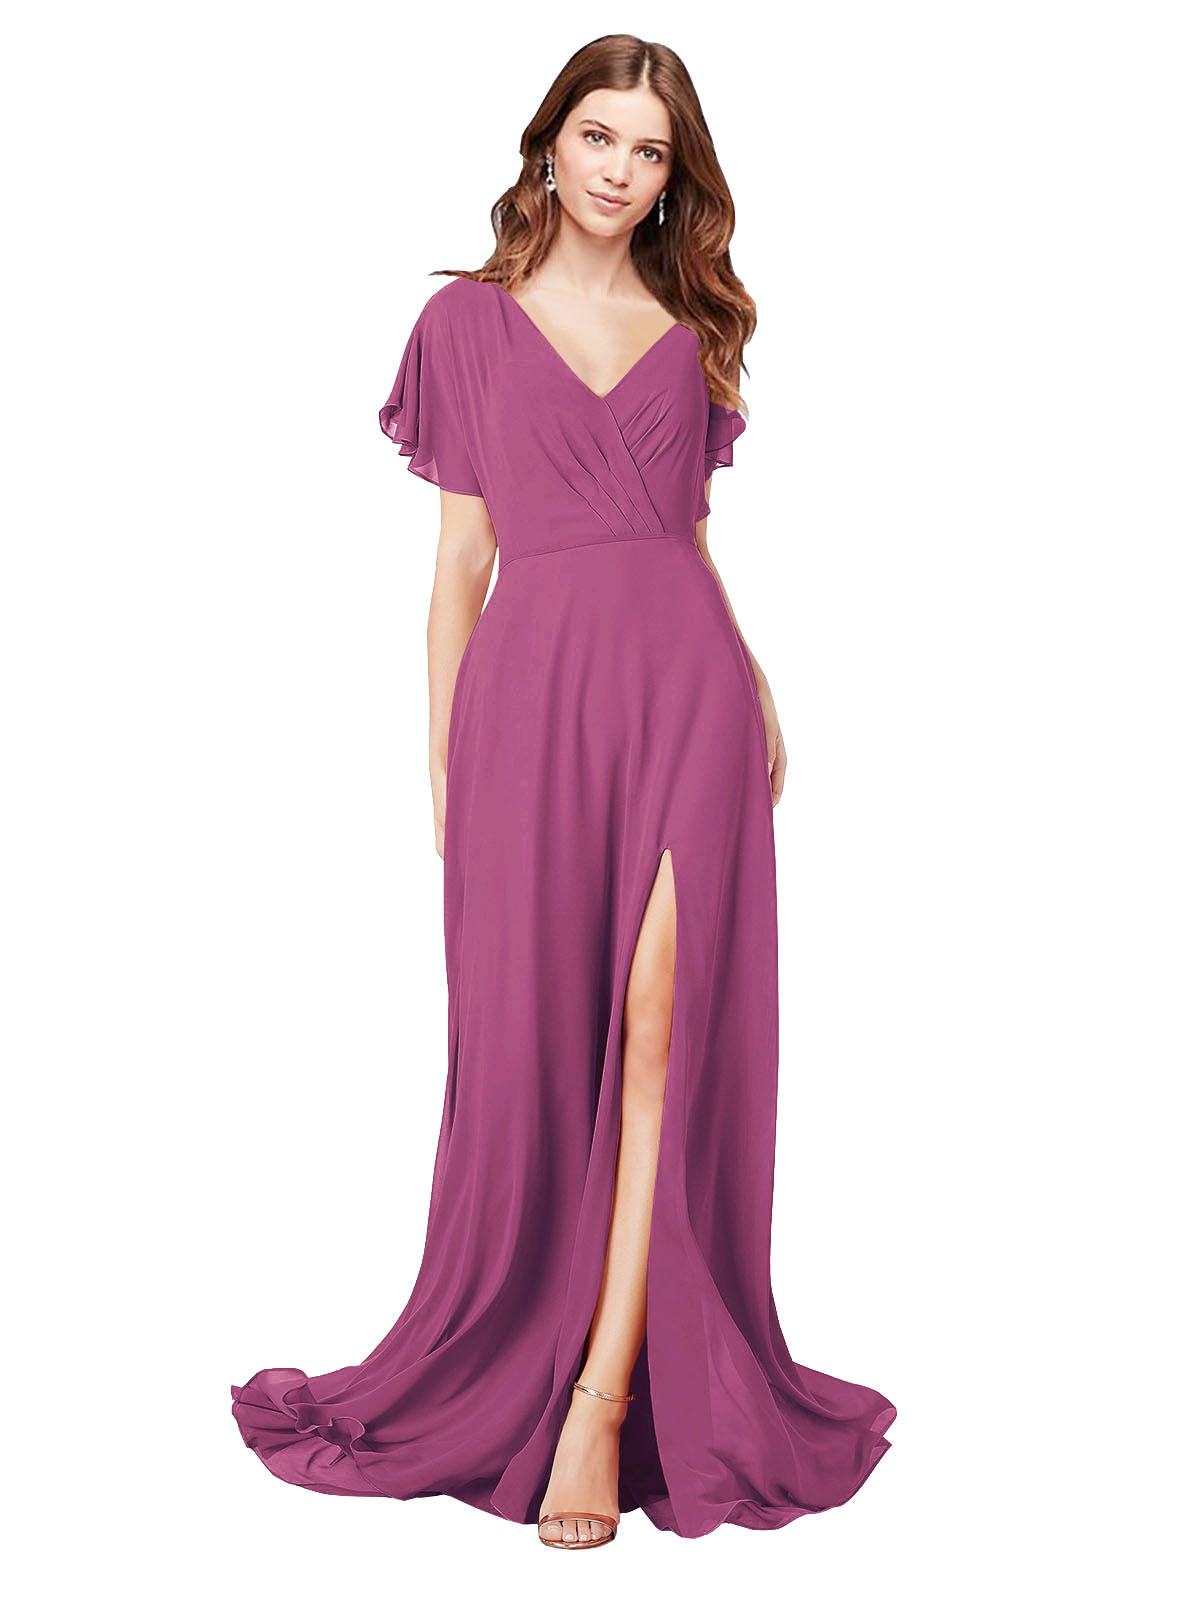 RightBrides Marisol Wild Berry A-Line V-Neck Cap Sleeves Long Bridesmaid Dress